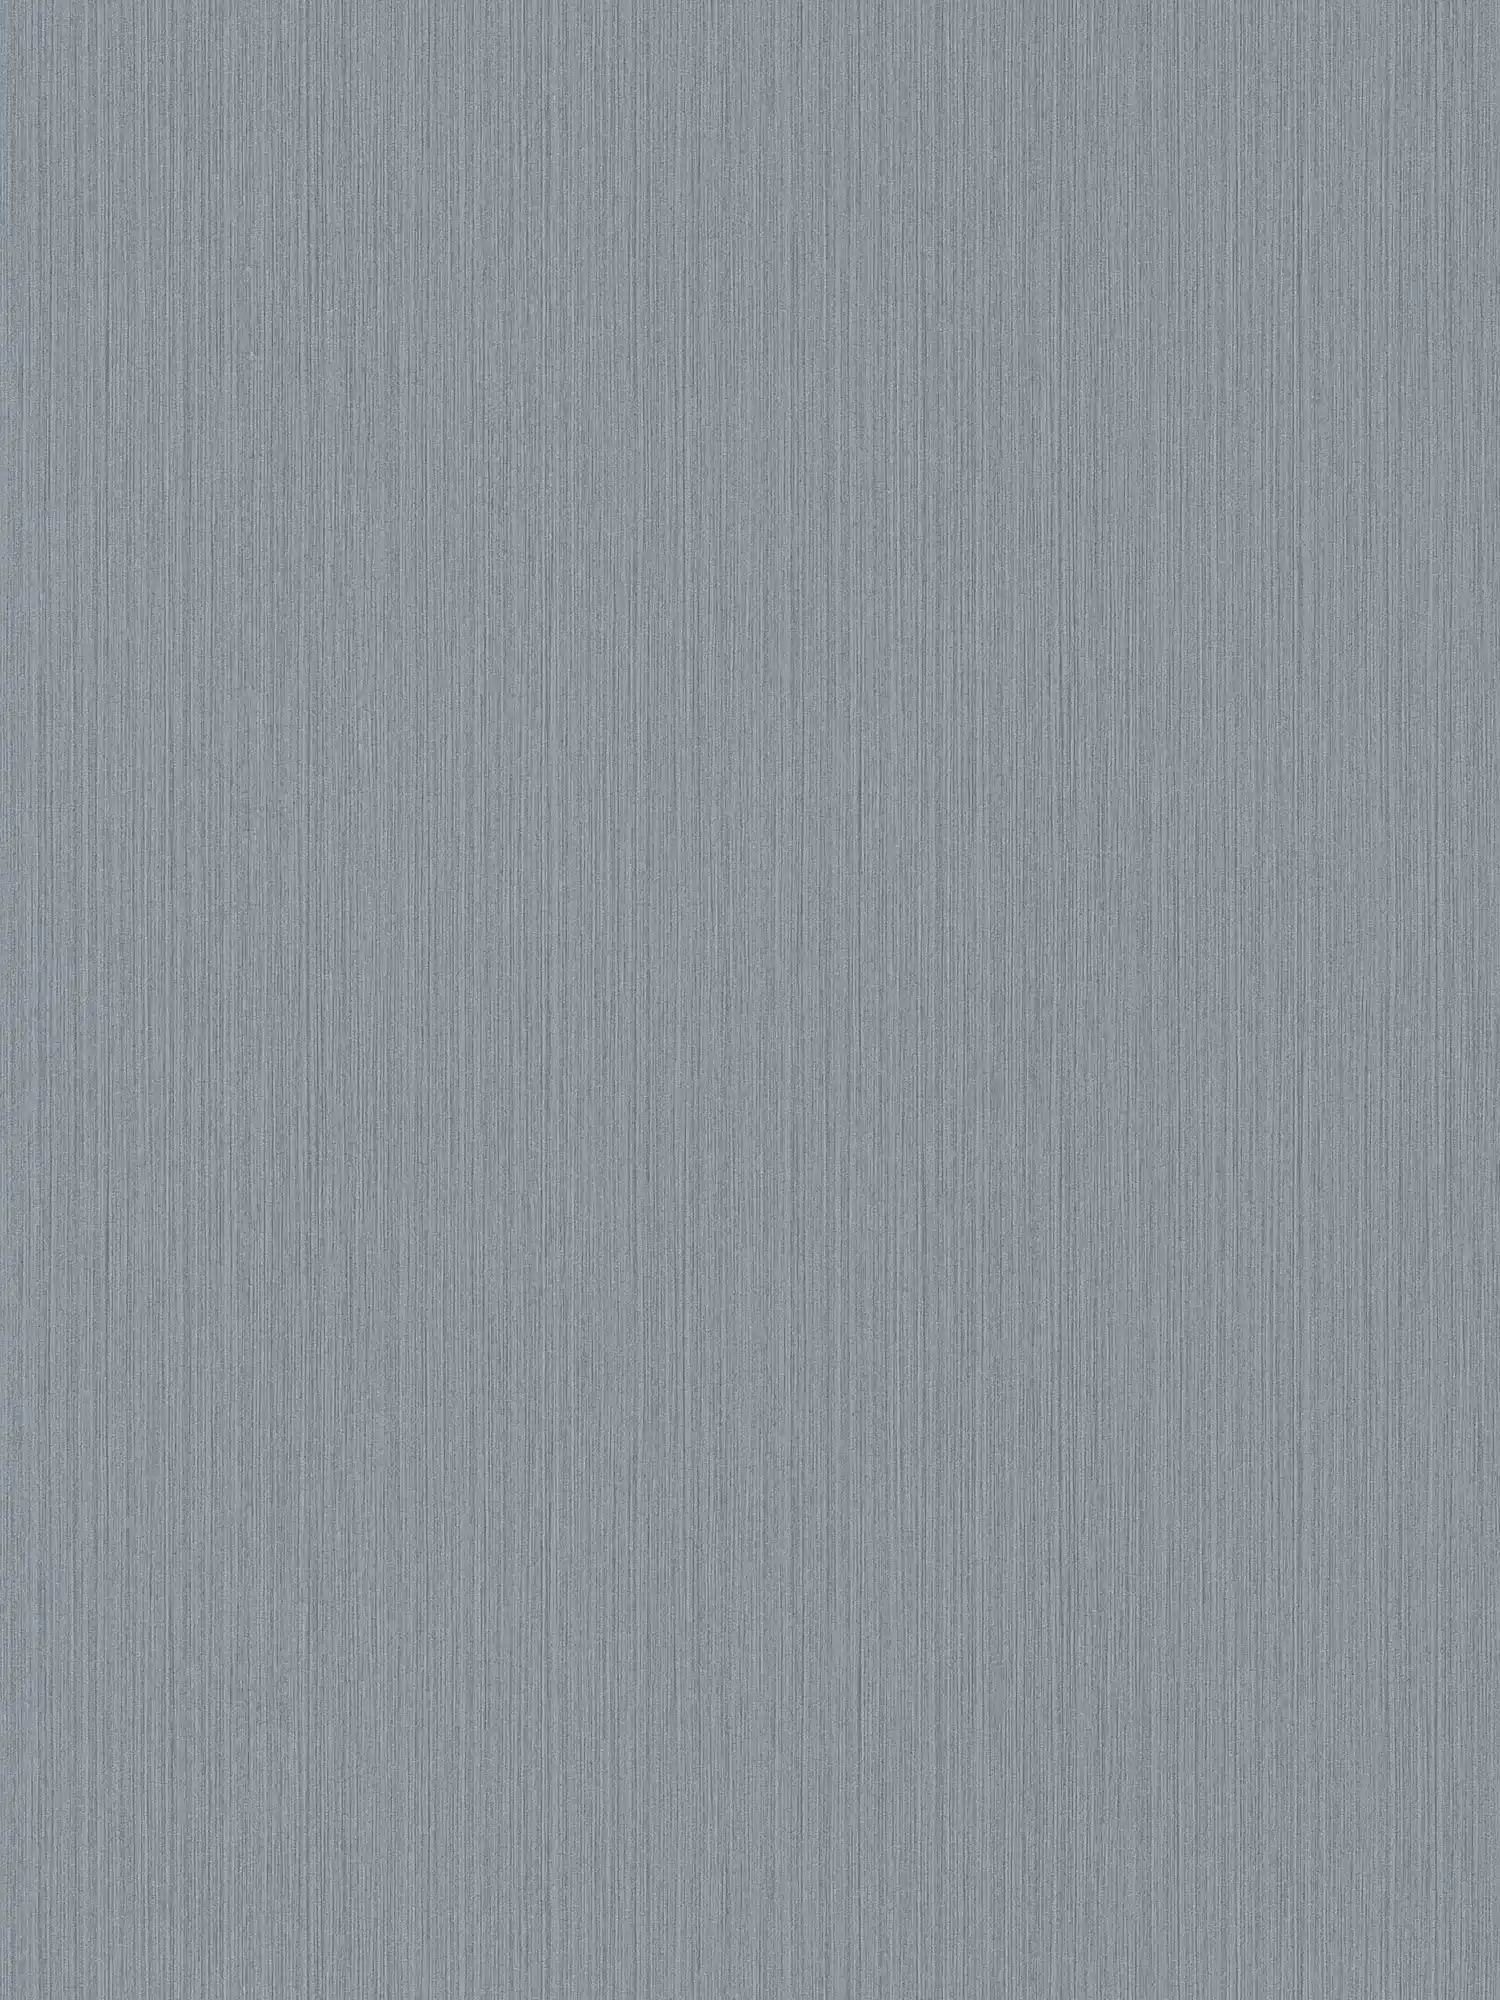 Plain wallpaper grey with mottled textile effect from MICHALSKY
